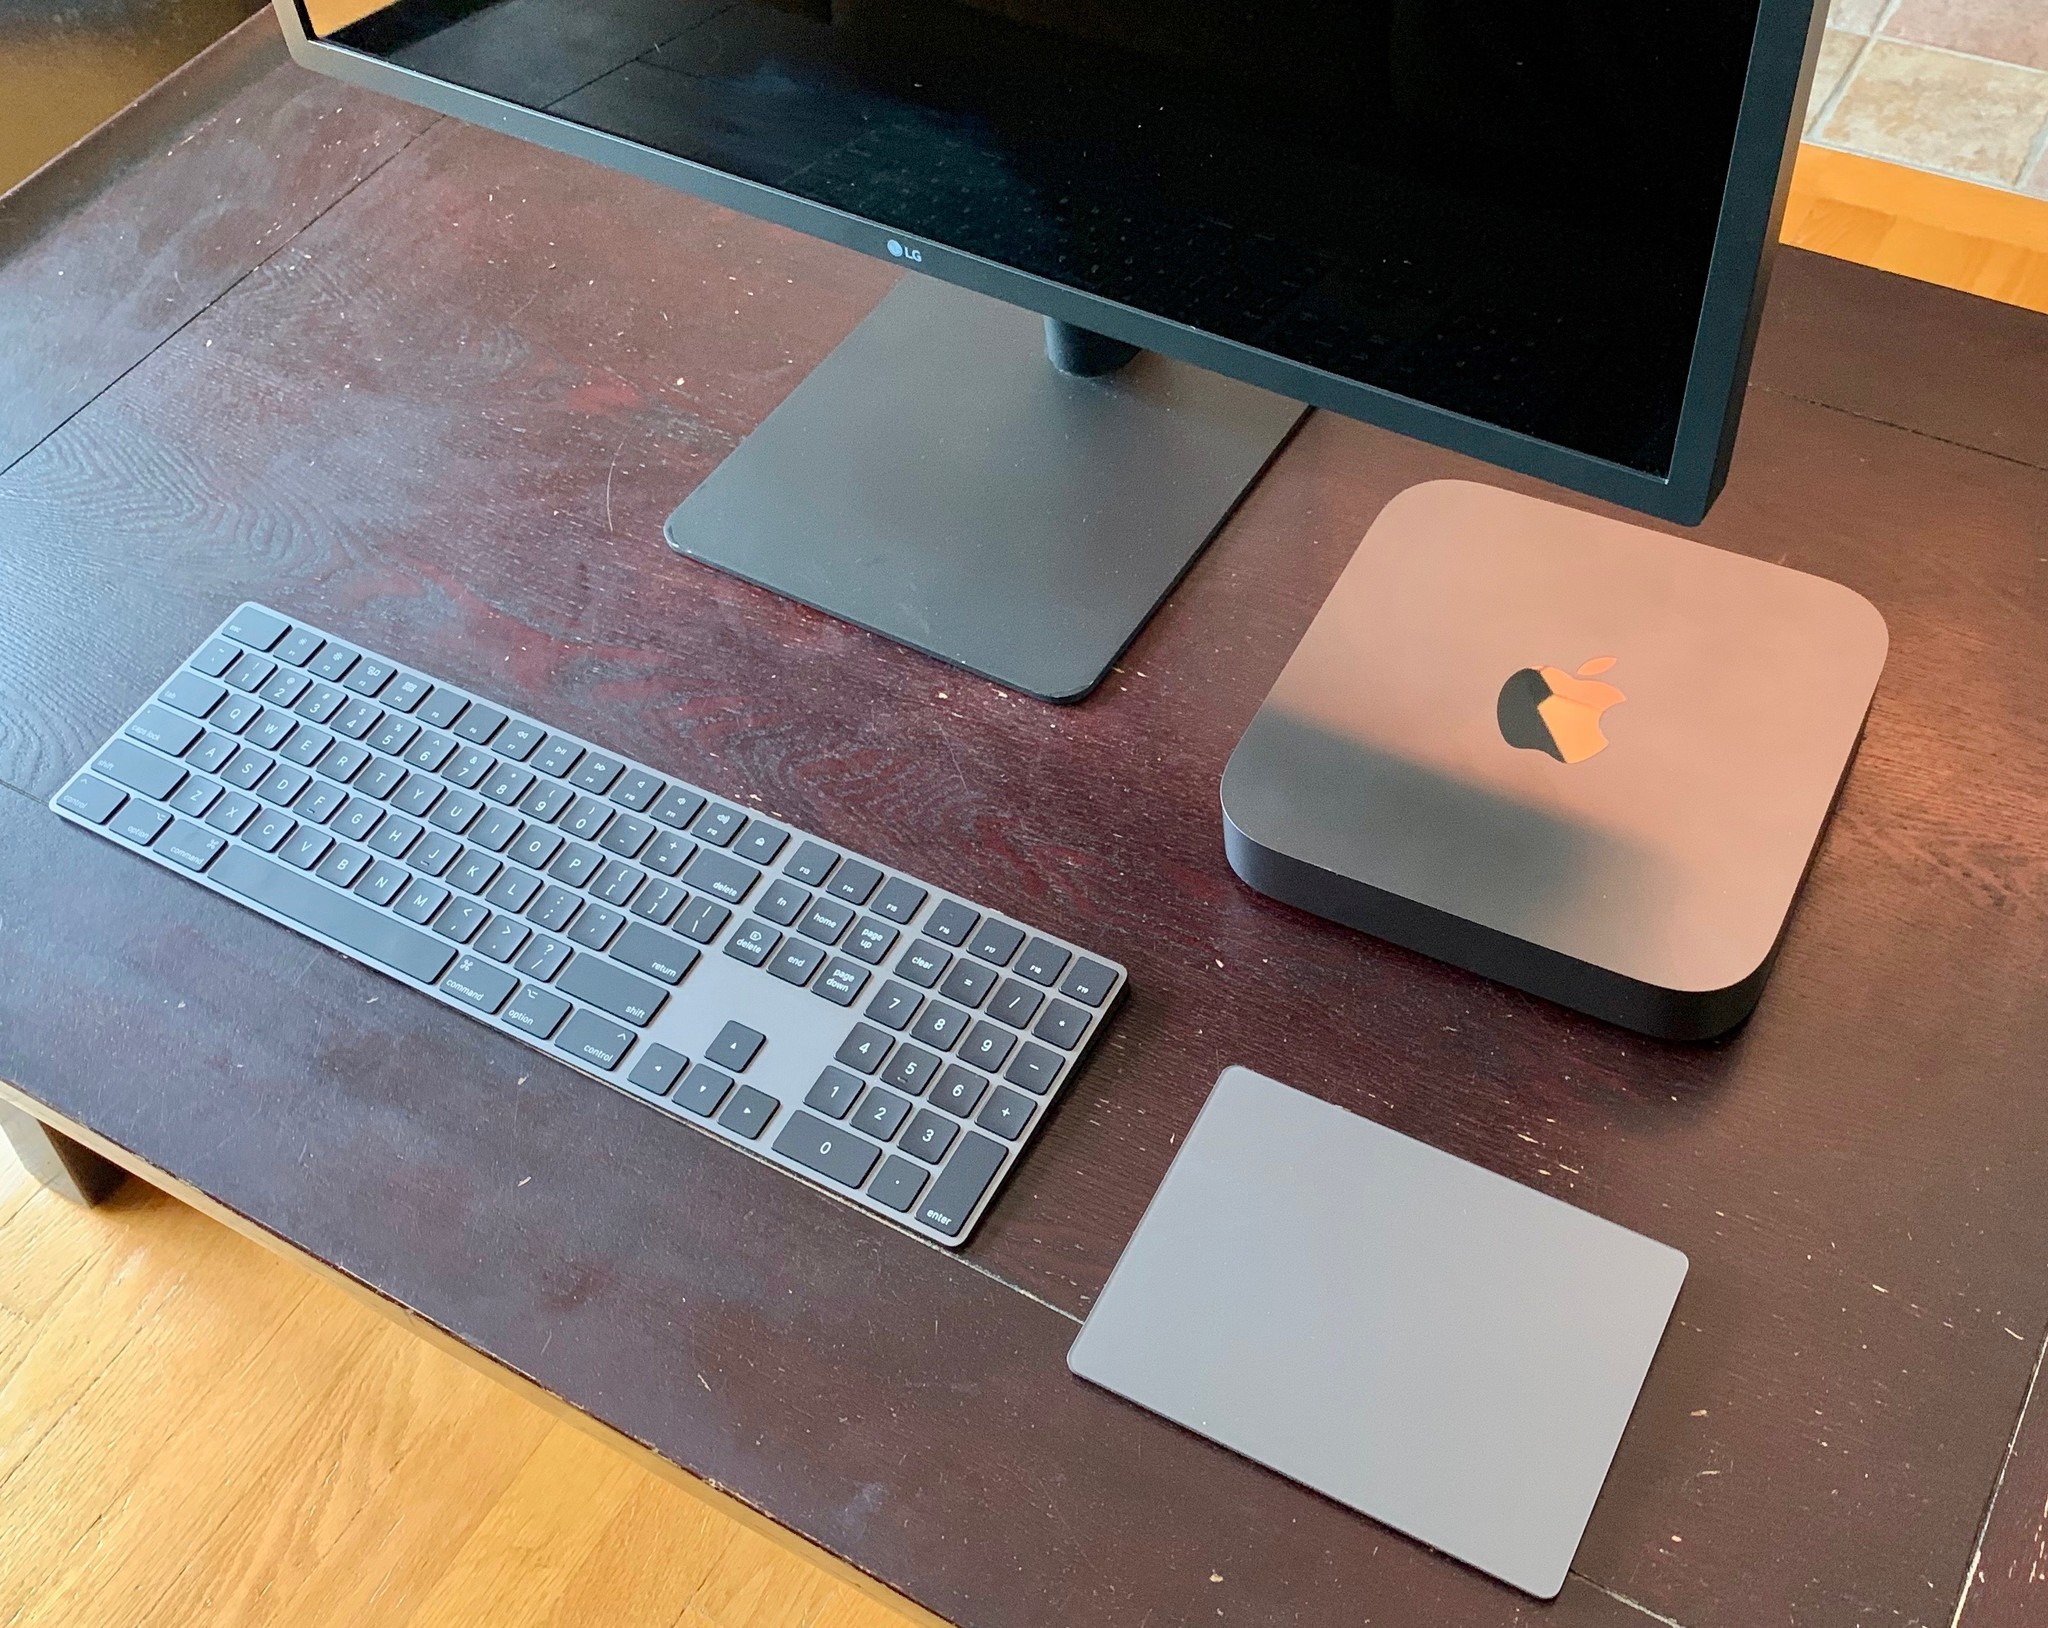 Does The Mac Mini Come With Software